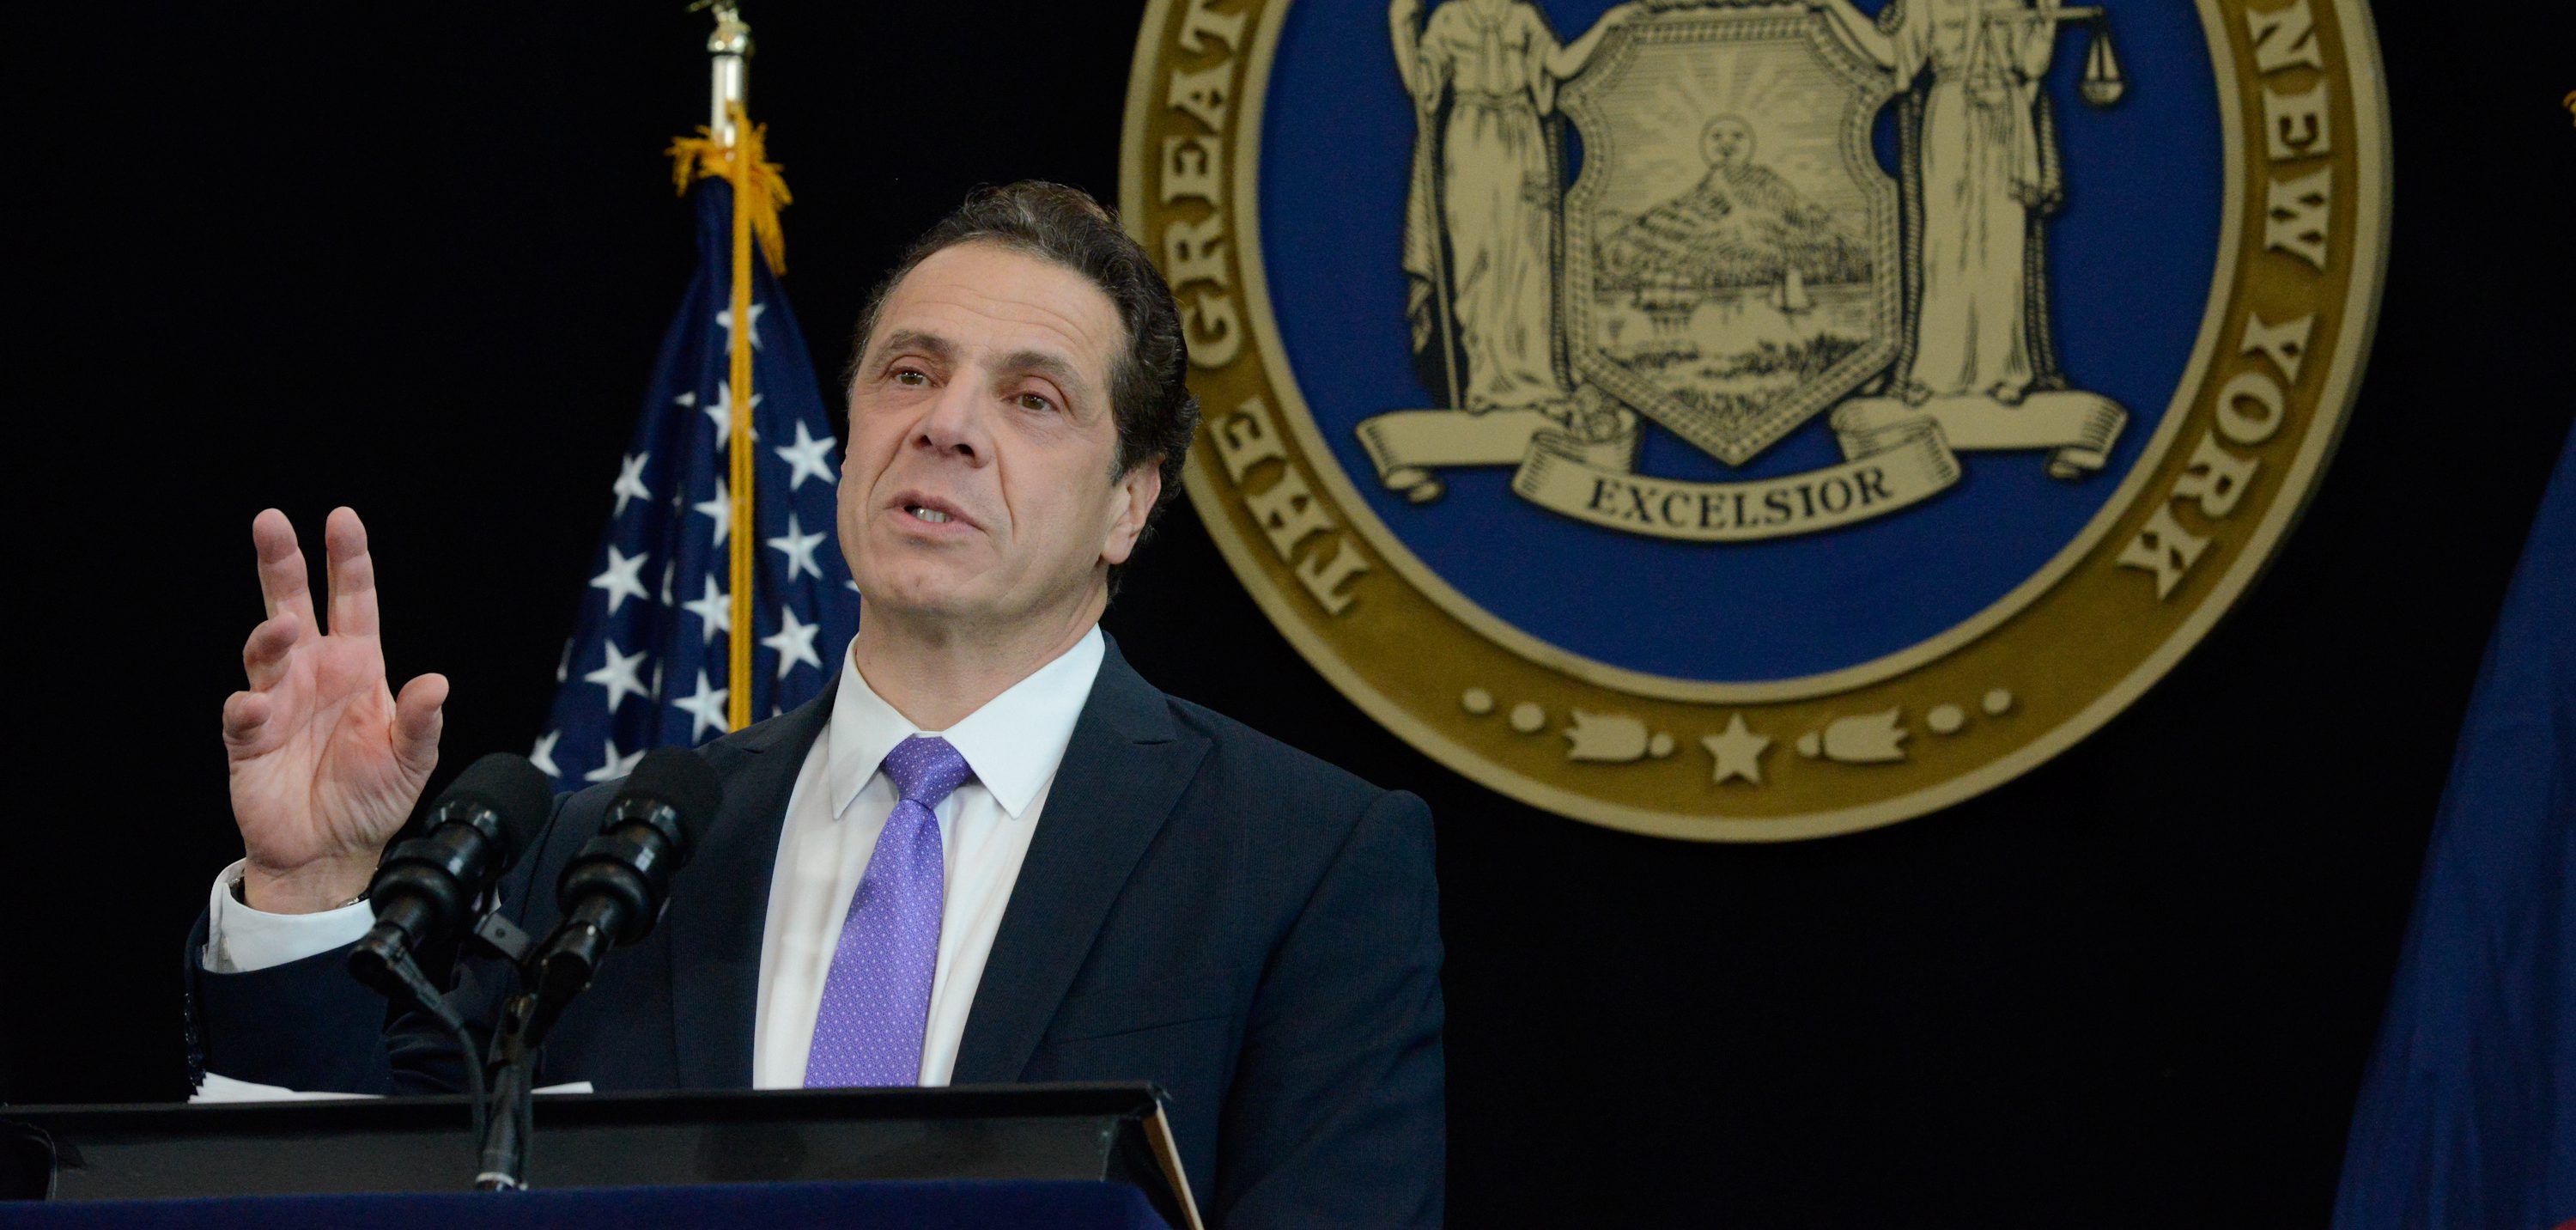 New York Governor Andrew Cuomo delivers his State of the State address in New York City